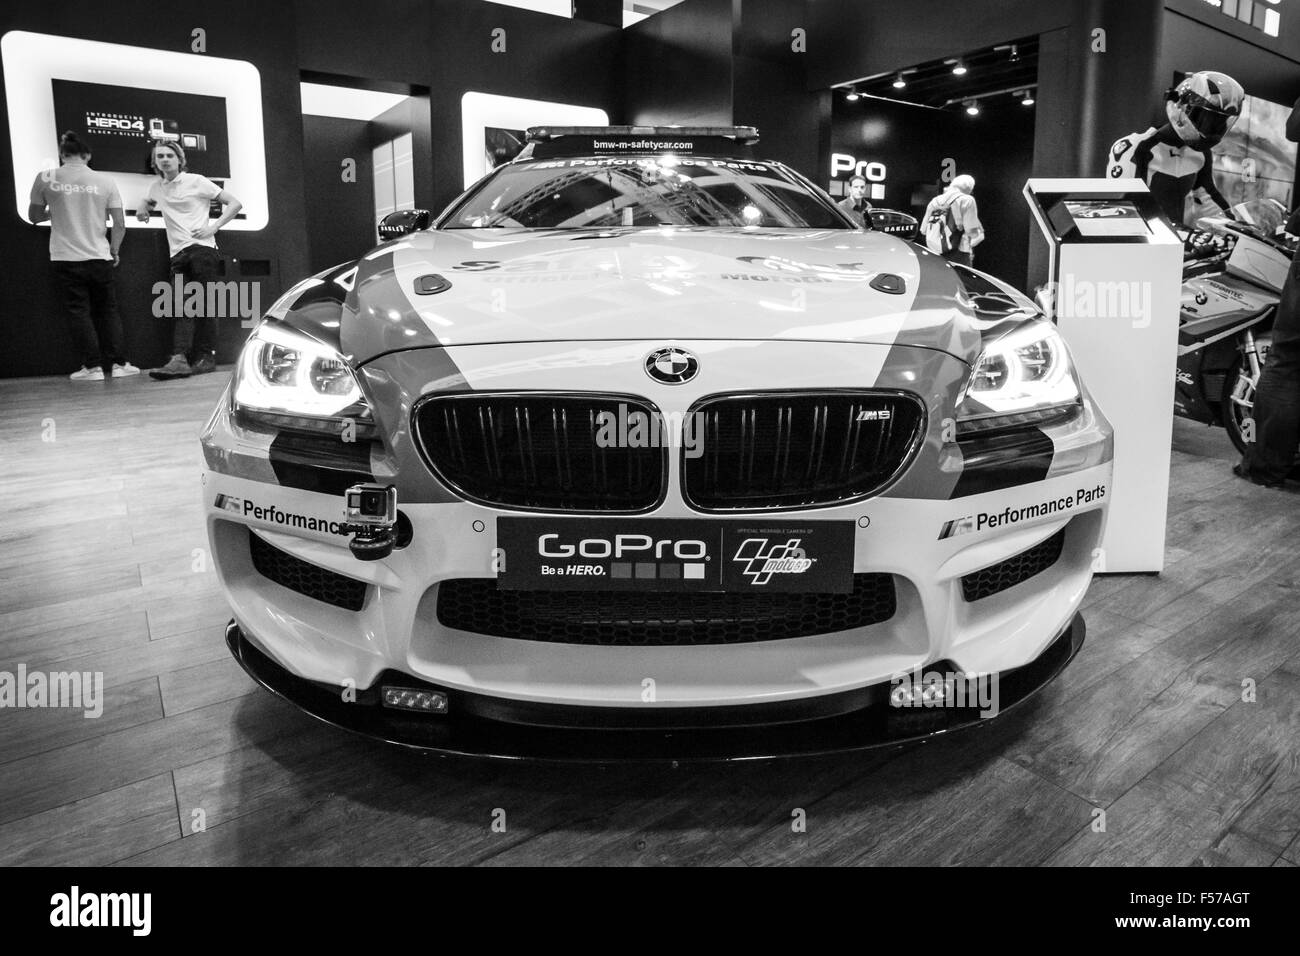 In stand by GoPro. Safety Car BMW M4 Coupe DTM. In bianco e nero. Radio internazionale mostra Berlino (IFA2015). Foto Stock